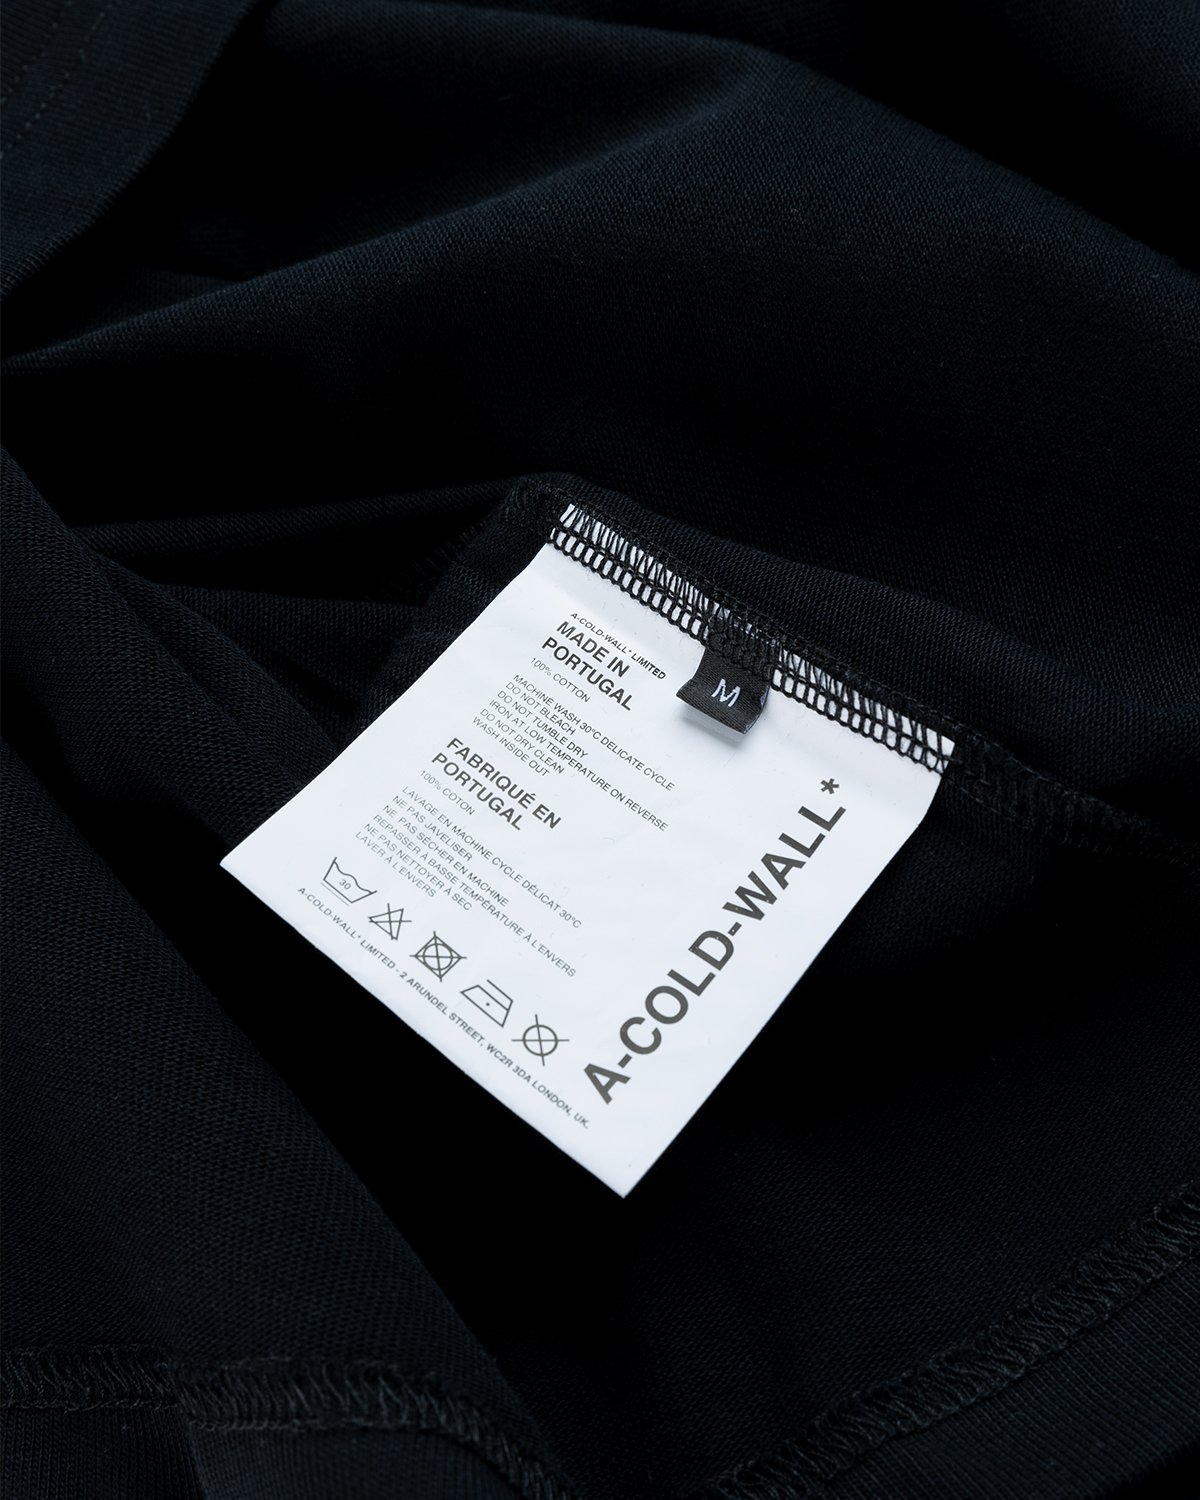 A-Cold-Wall* - Hypergraphic Longsleeve Black - Clothing - Black - Image 6